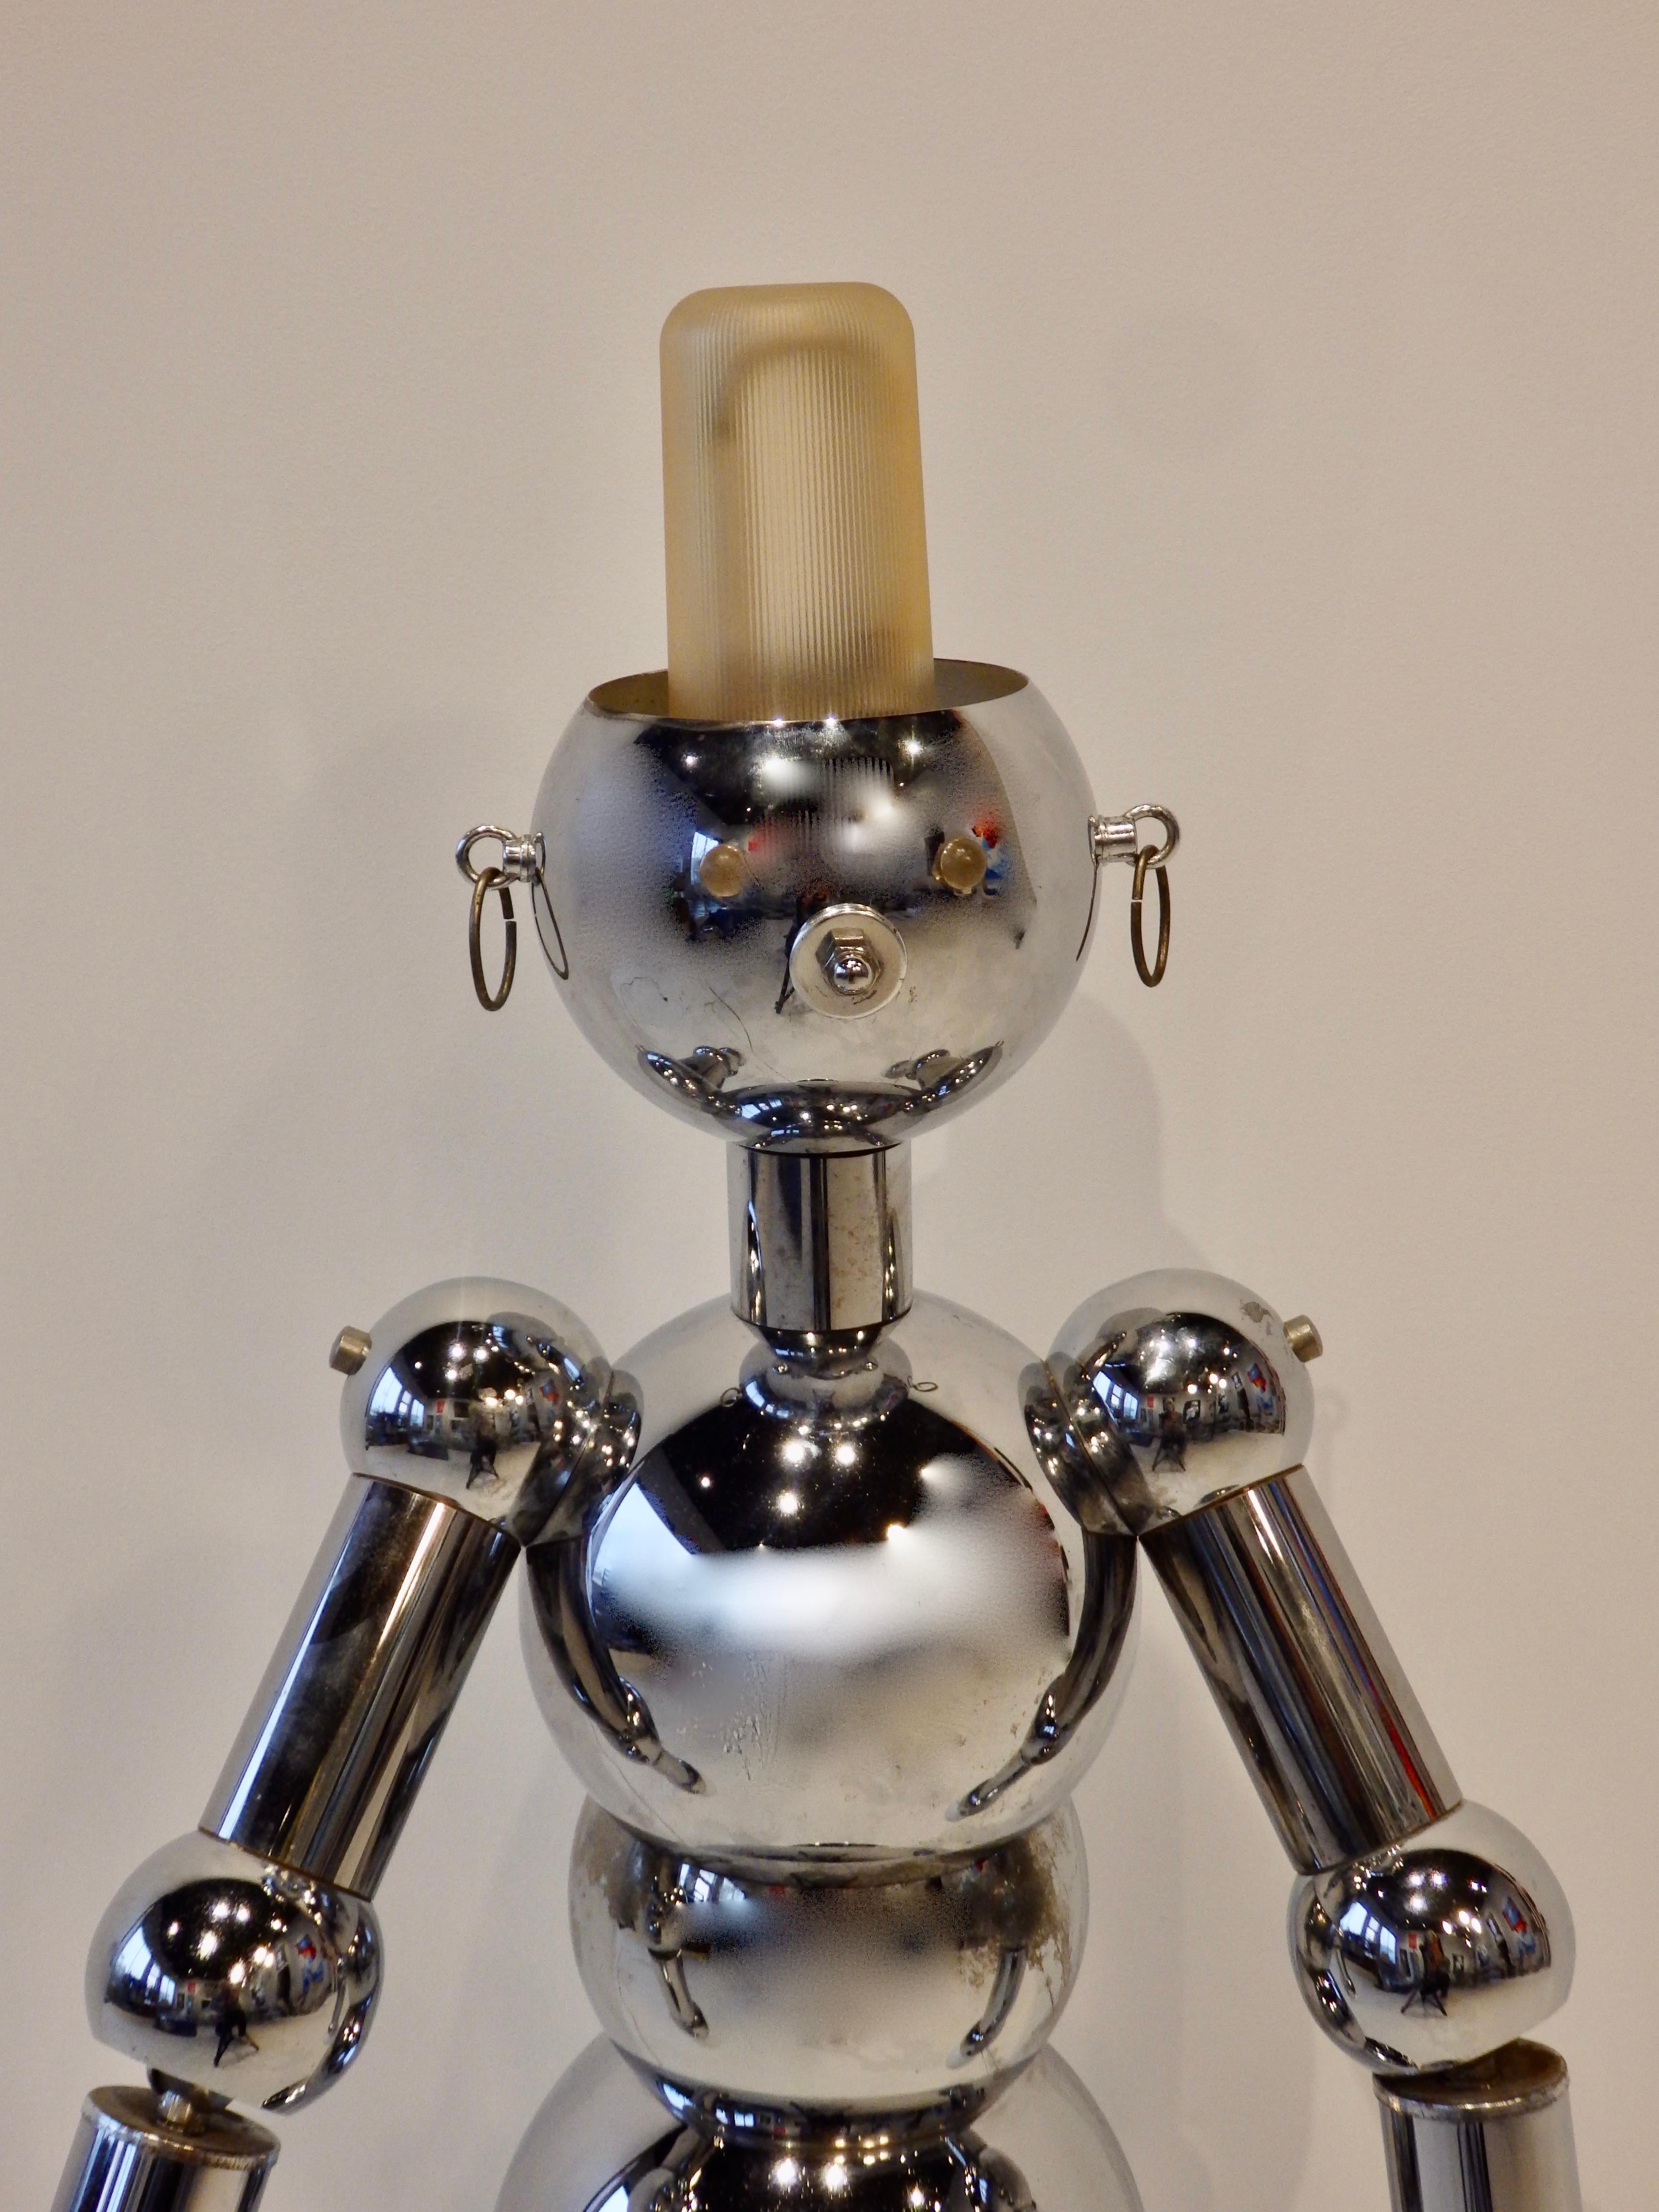 Hand-Crafted Italian Chrome Robot Lamp by Torino